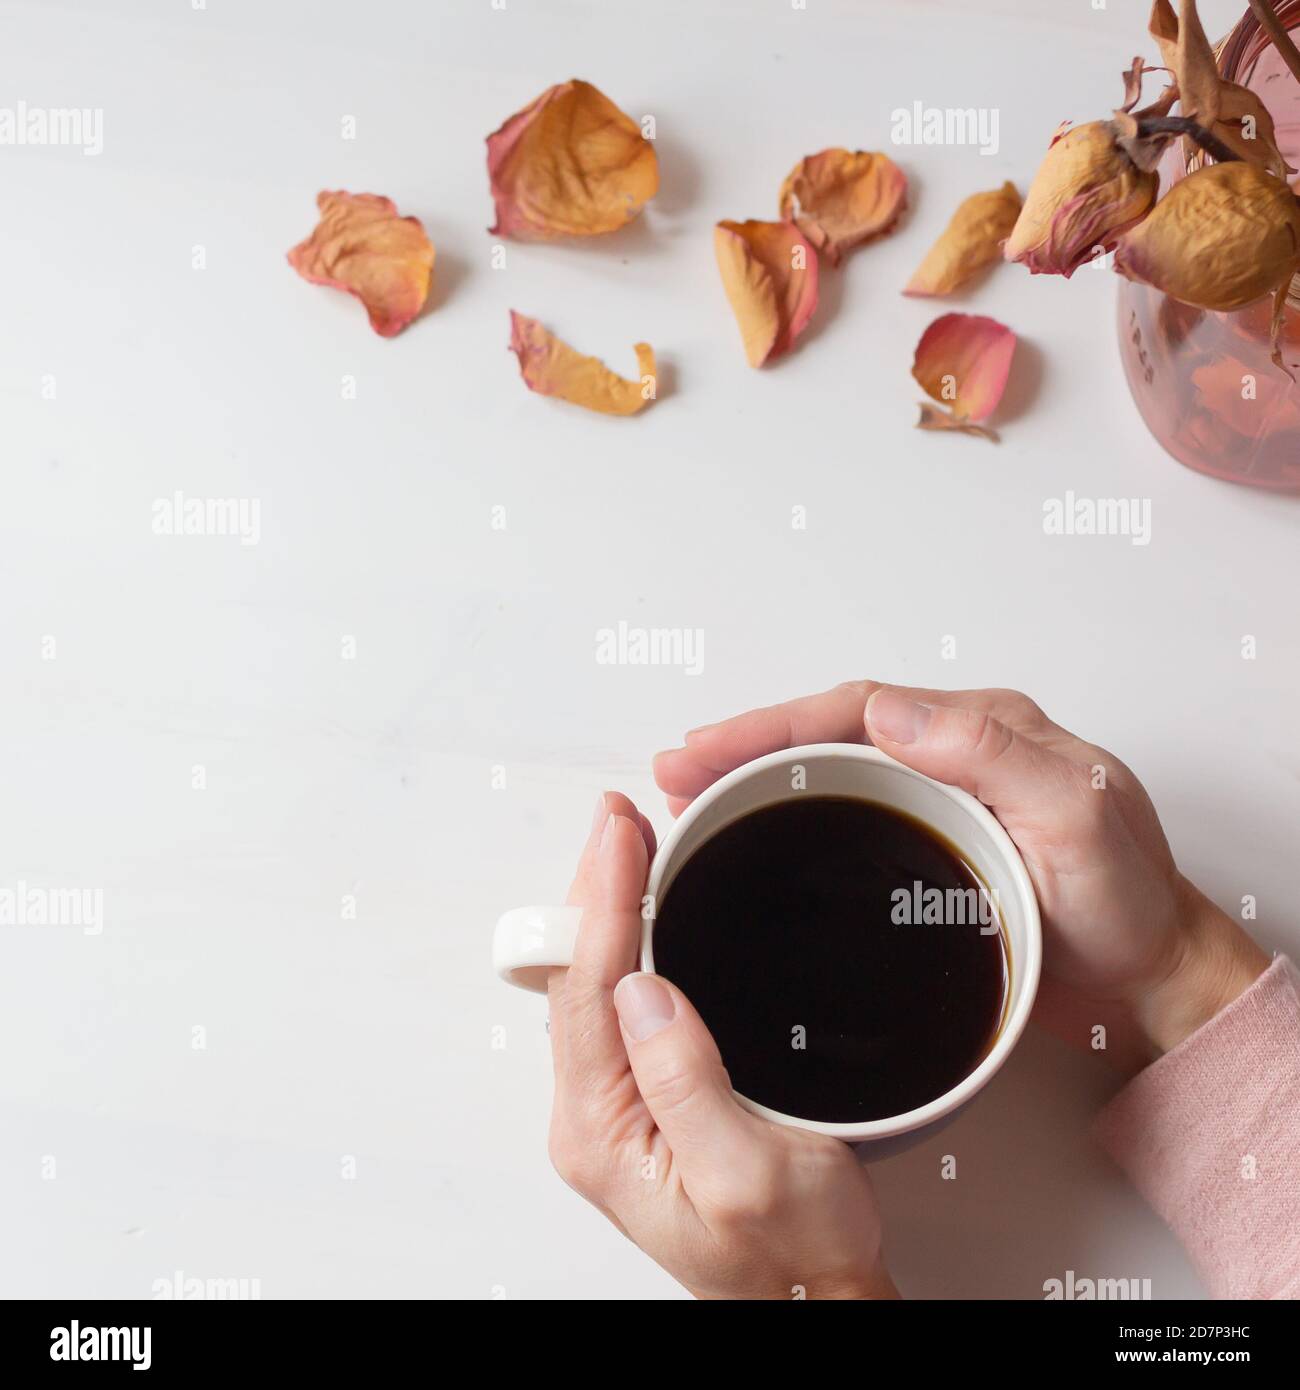 https://c8.alamy.com/comp/2D7P3HC/mug-of-hot-coffee-in-hands-with-soft-pink-sweater-and-pink-flower-petals-2D7P3HC.jpg